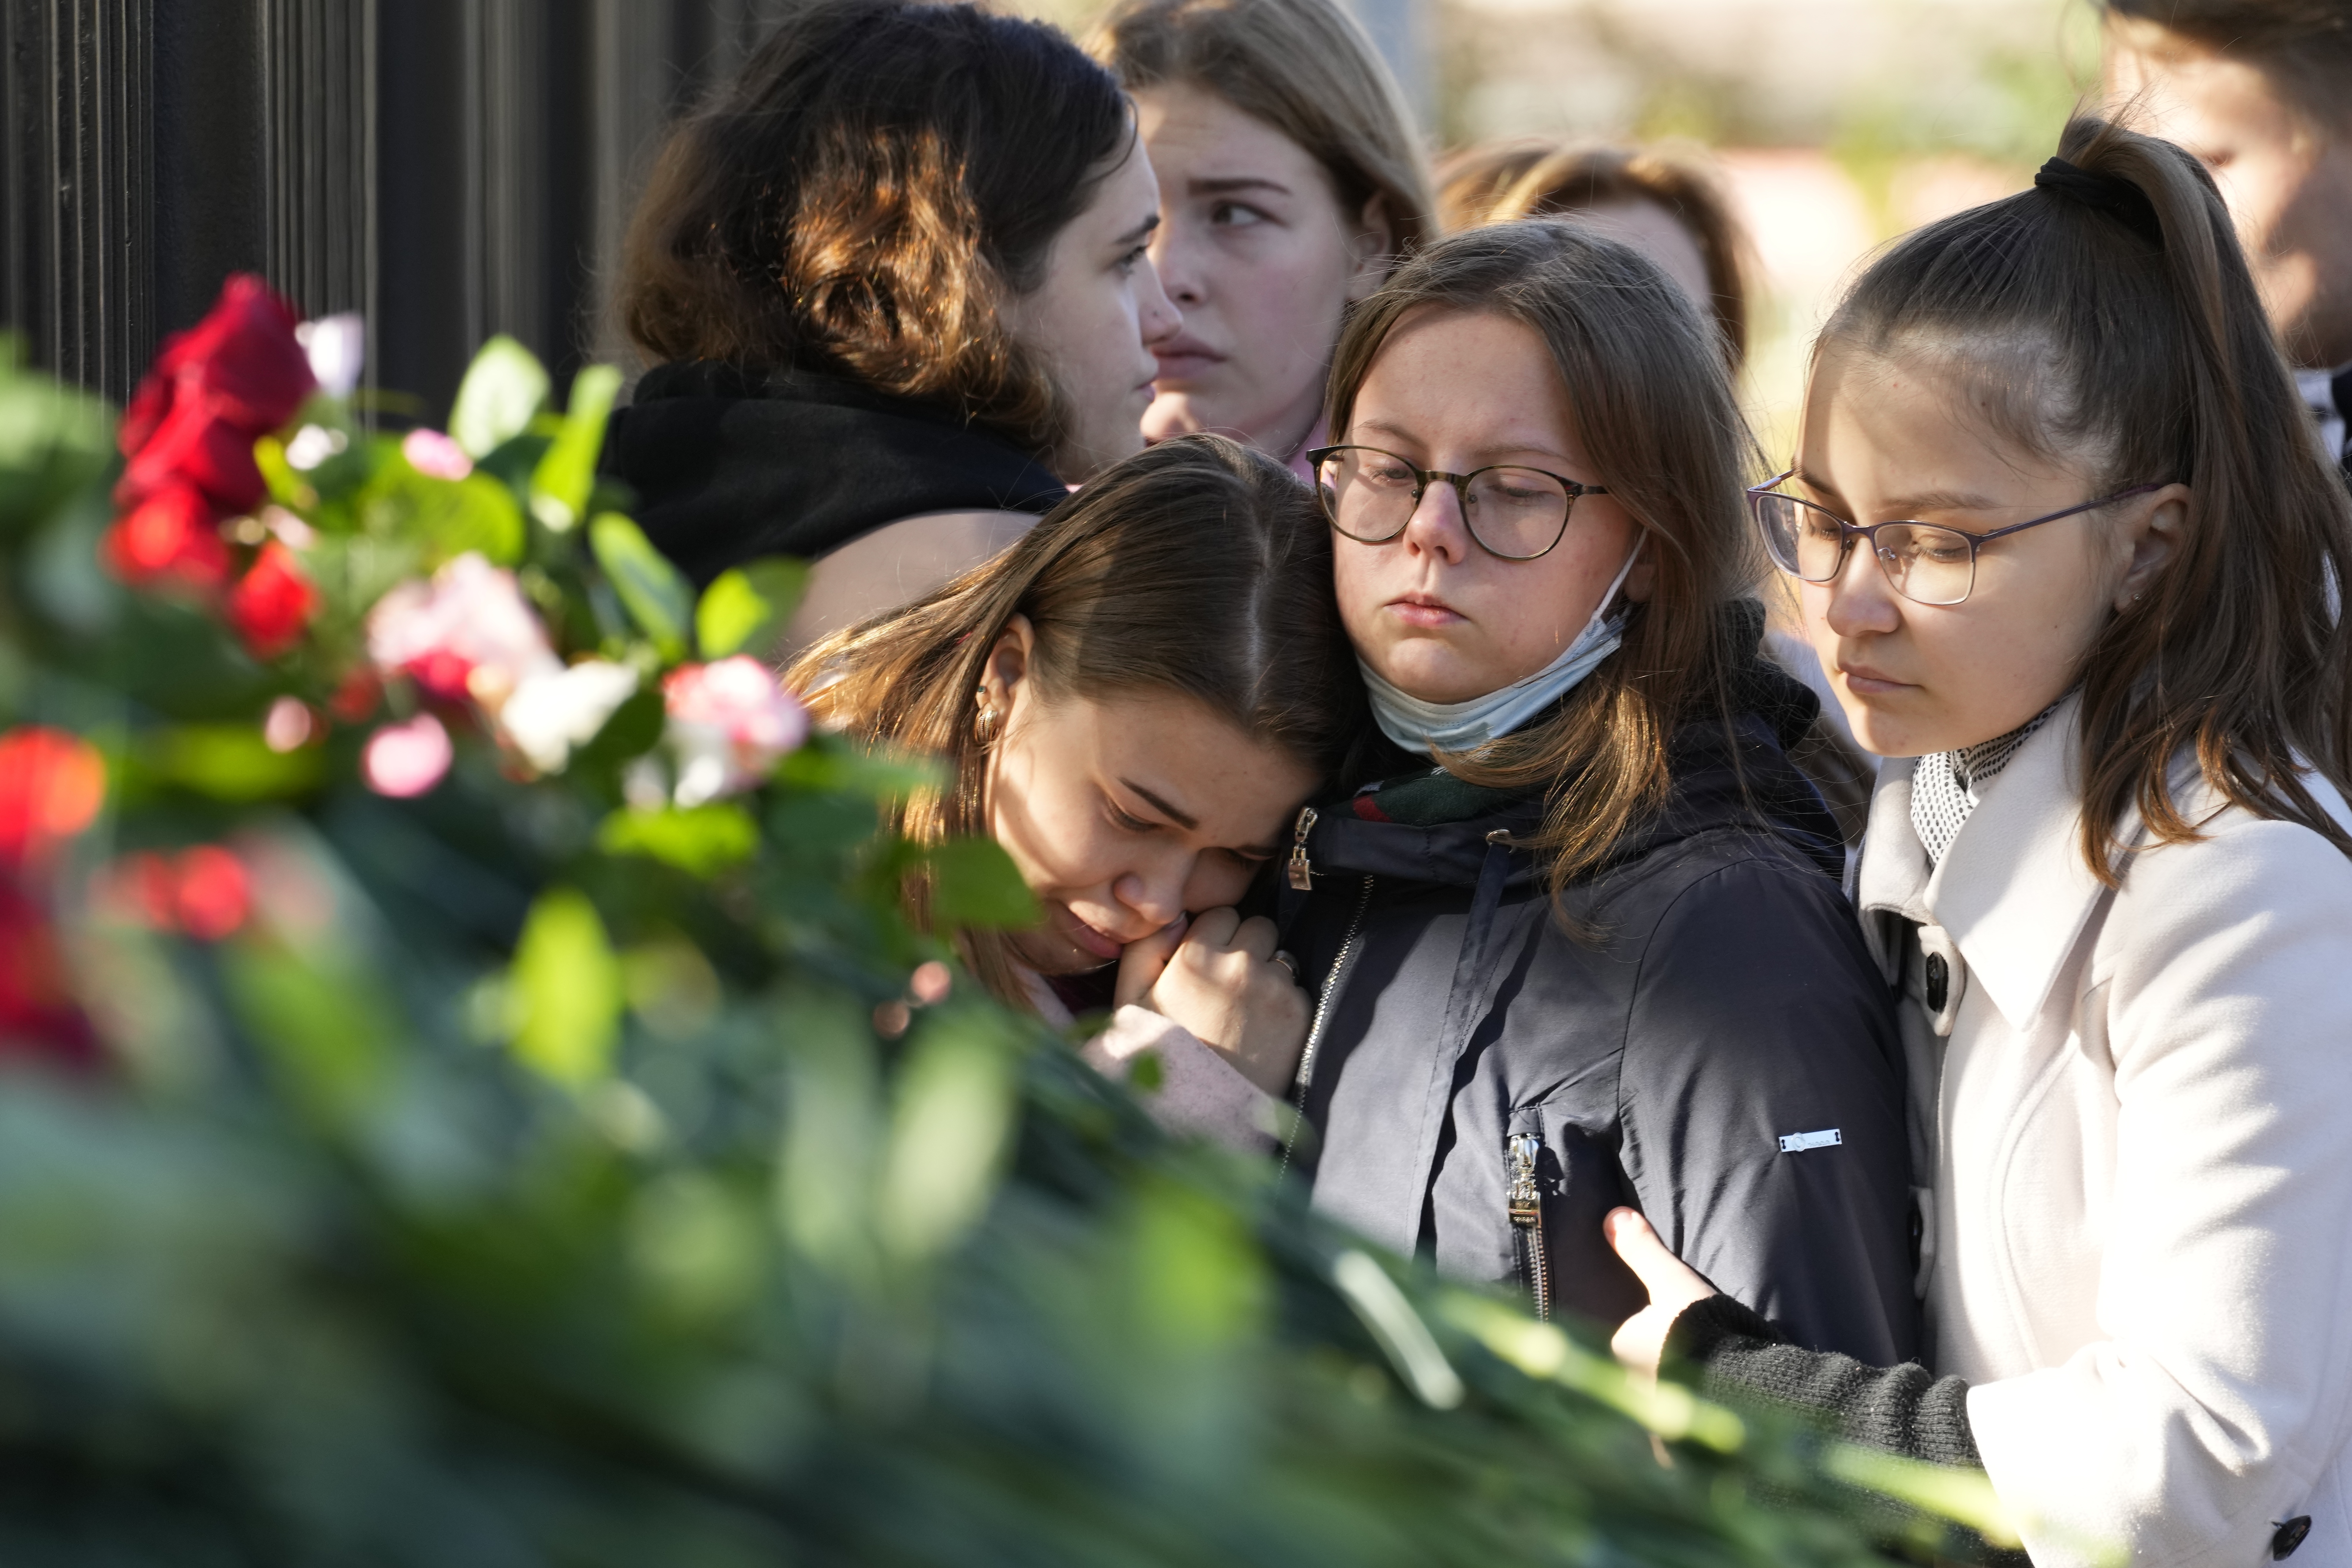 Students comfort each other as they gather outside the Perm State University following the campus shooting. (AP Photo/Dmitri Lovetsky)